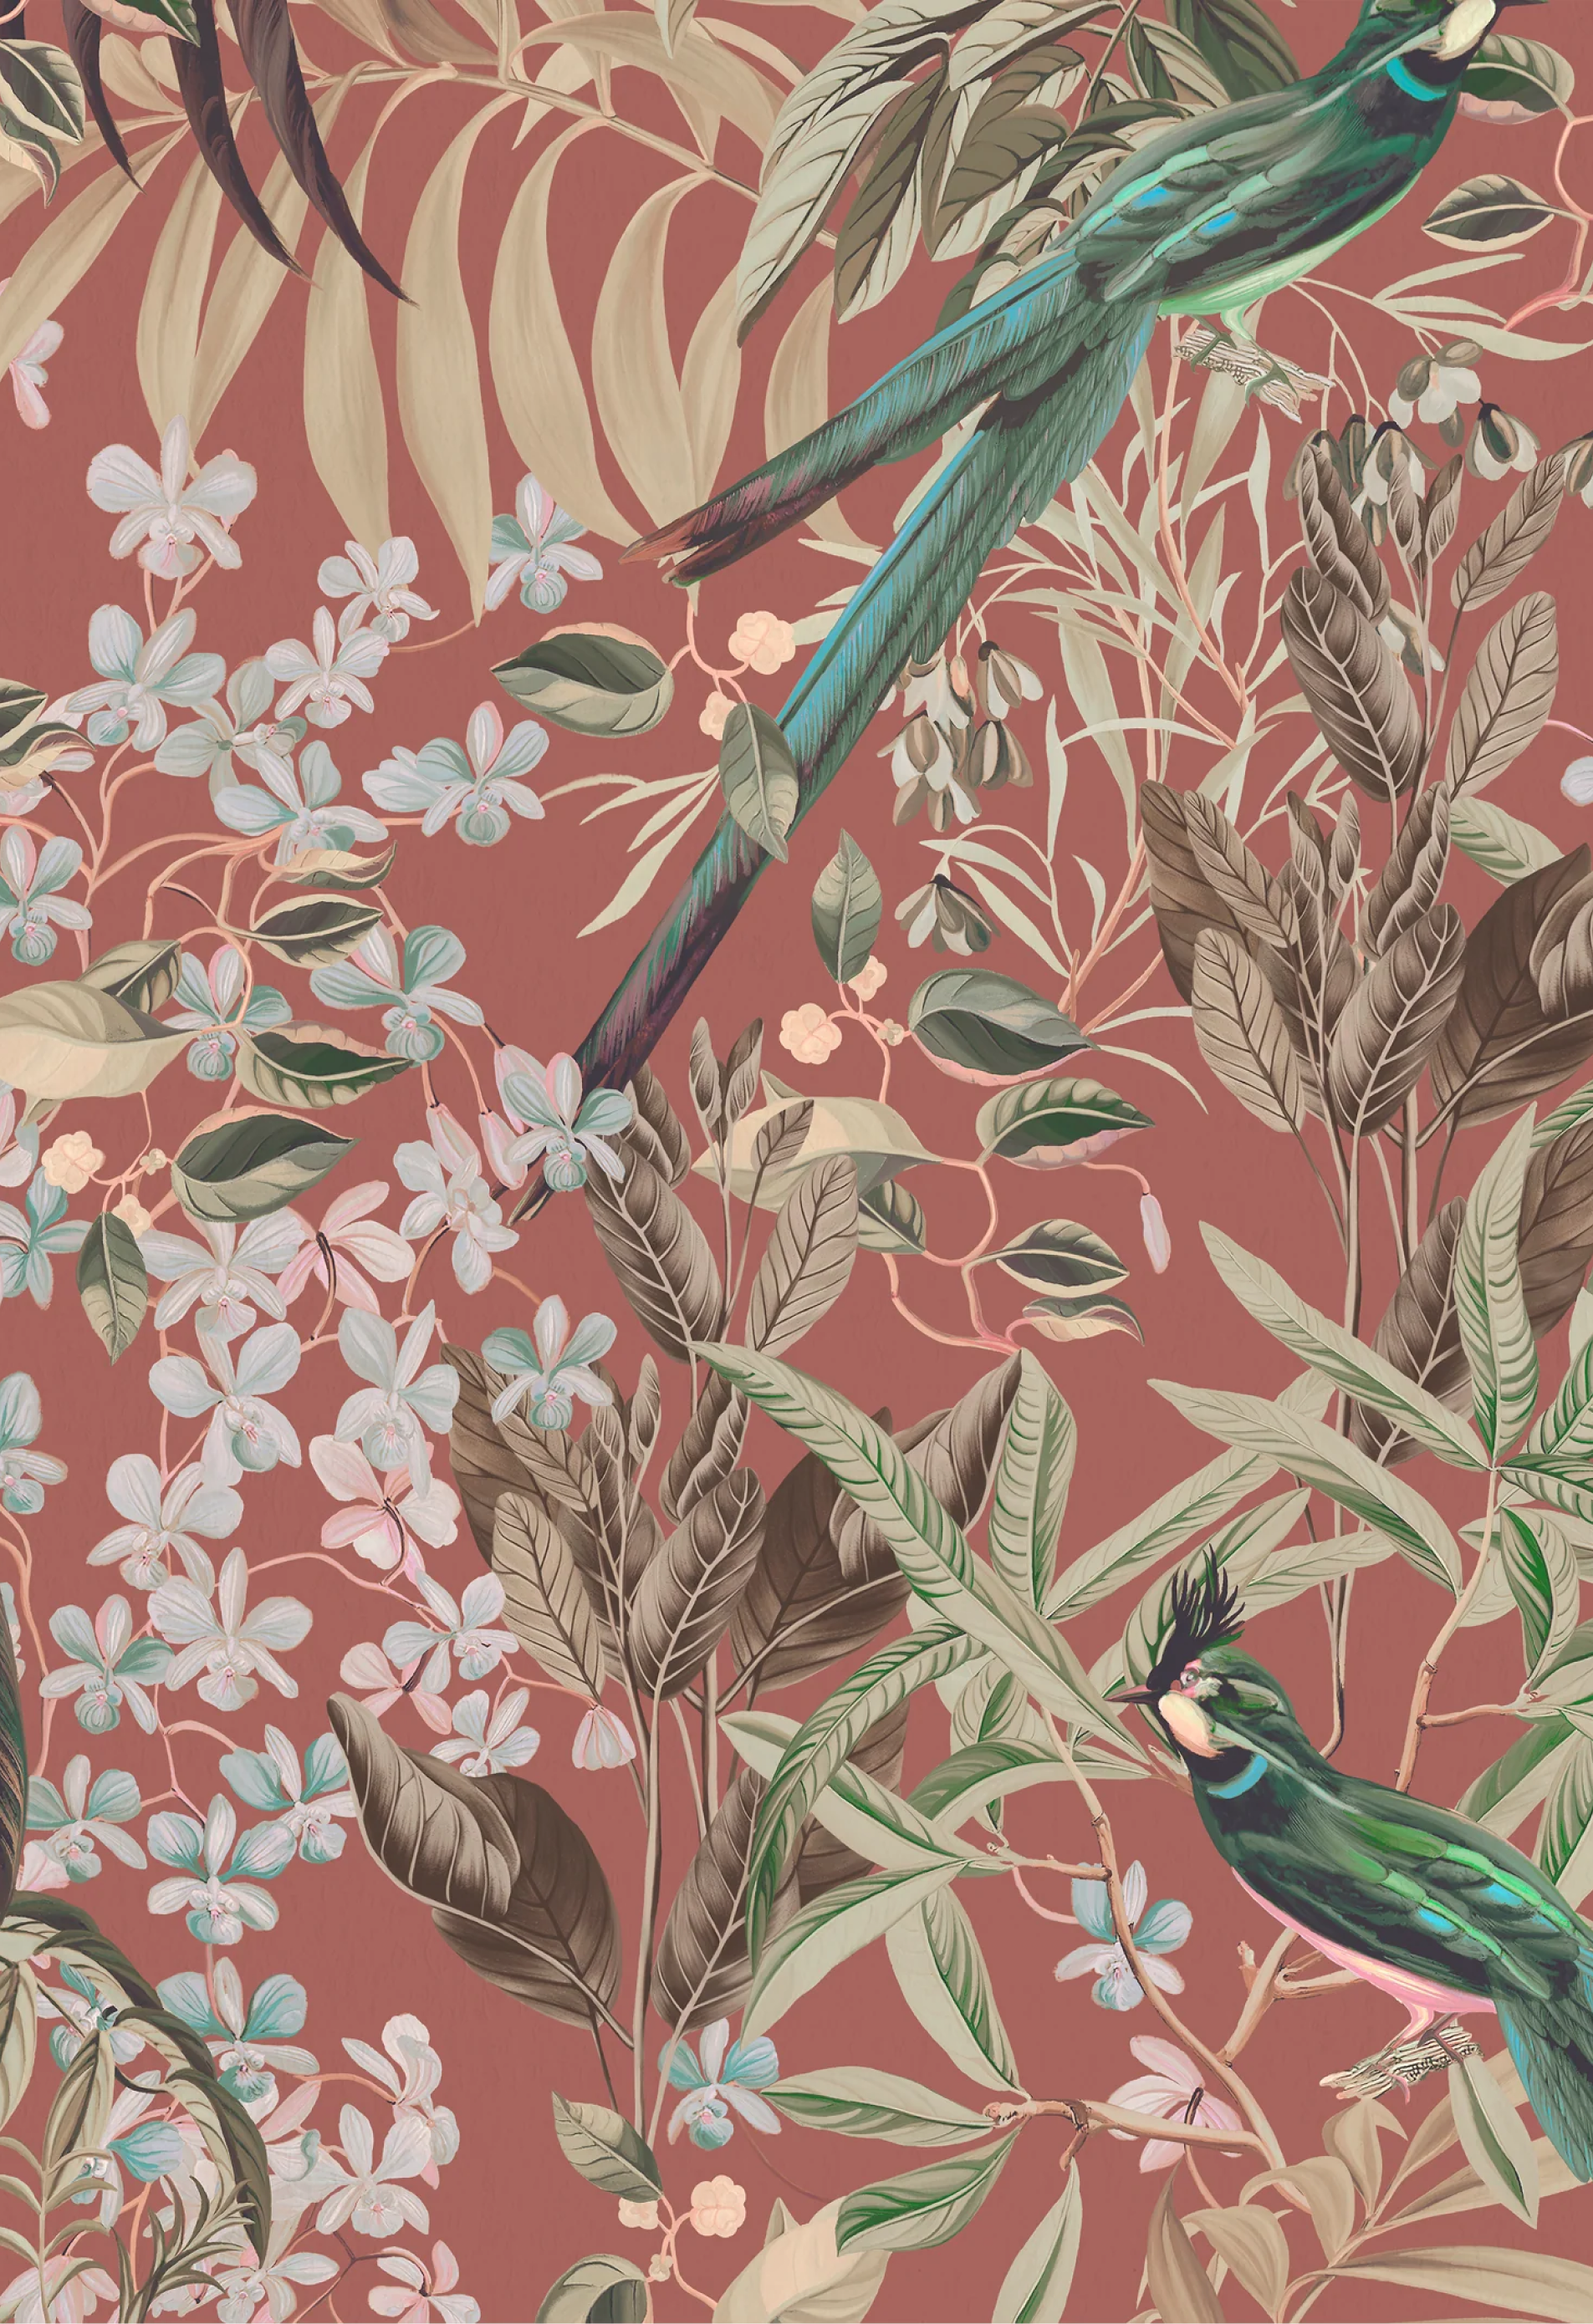 Botanical green tropical bird surrounded by leaves and florals from Deus ex Gardenia's Resplendent Woods Wallpaper in Terracotta. 